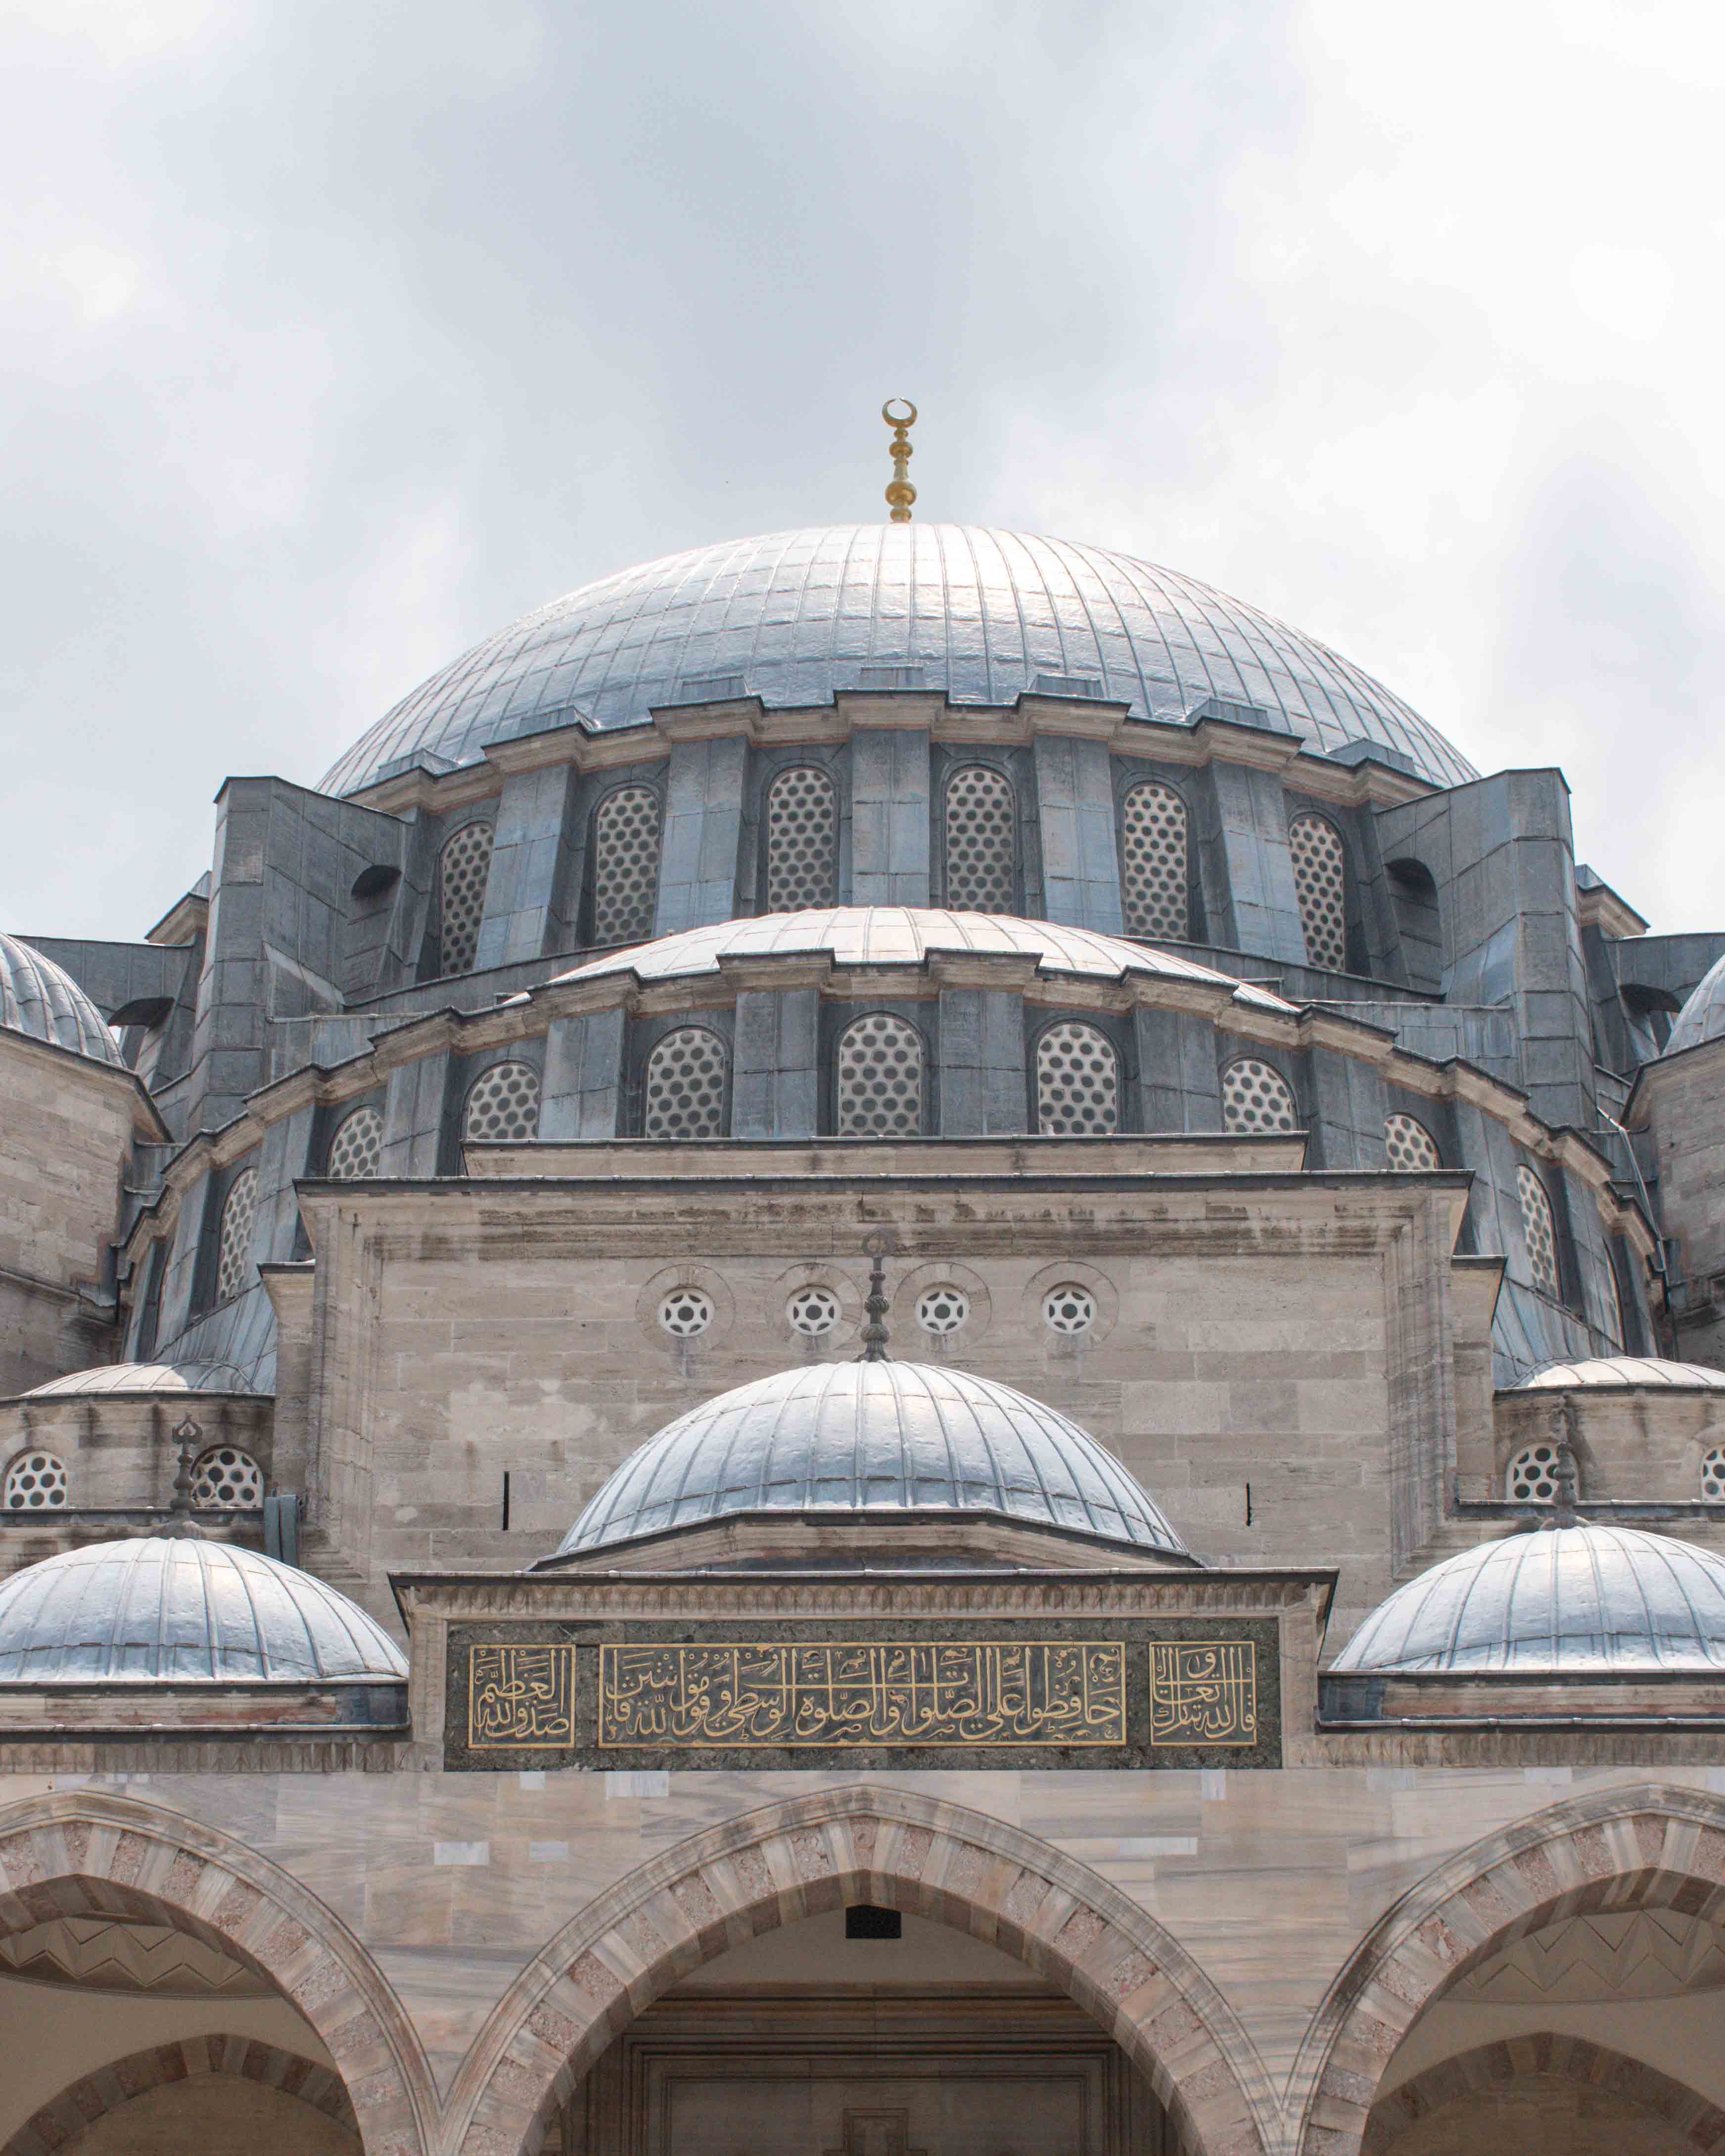 Main dome on top of Süleymaniye Mosque seen from the outside